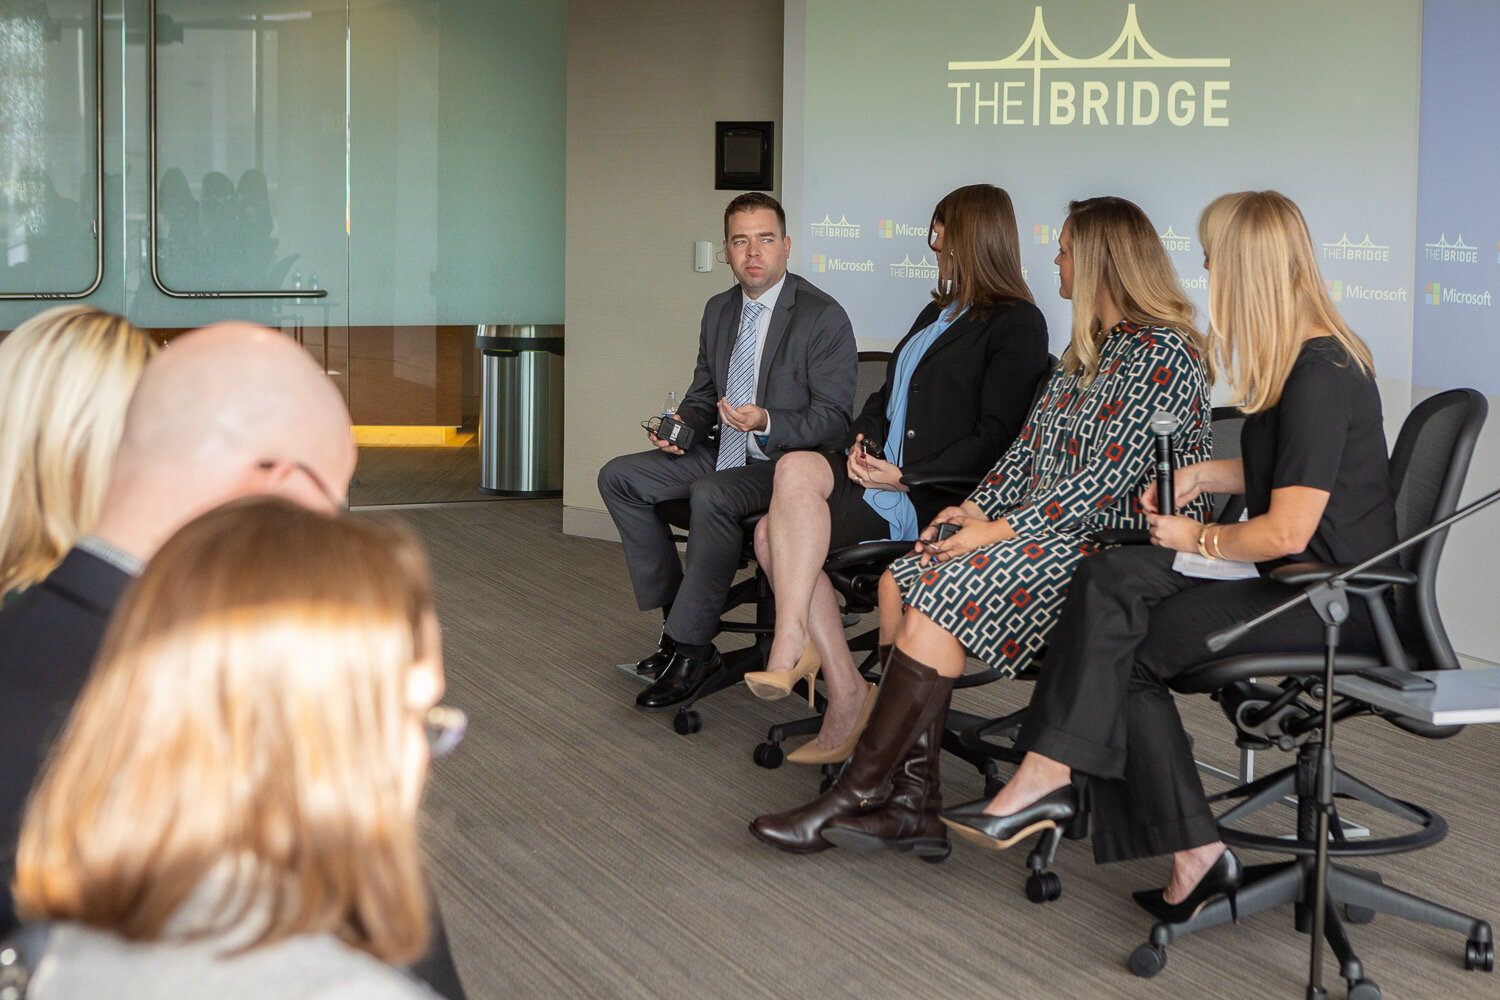 TheBridge and Microsoft Election Security Discussion 